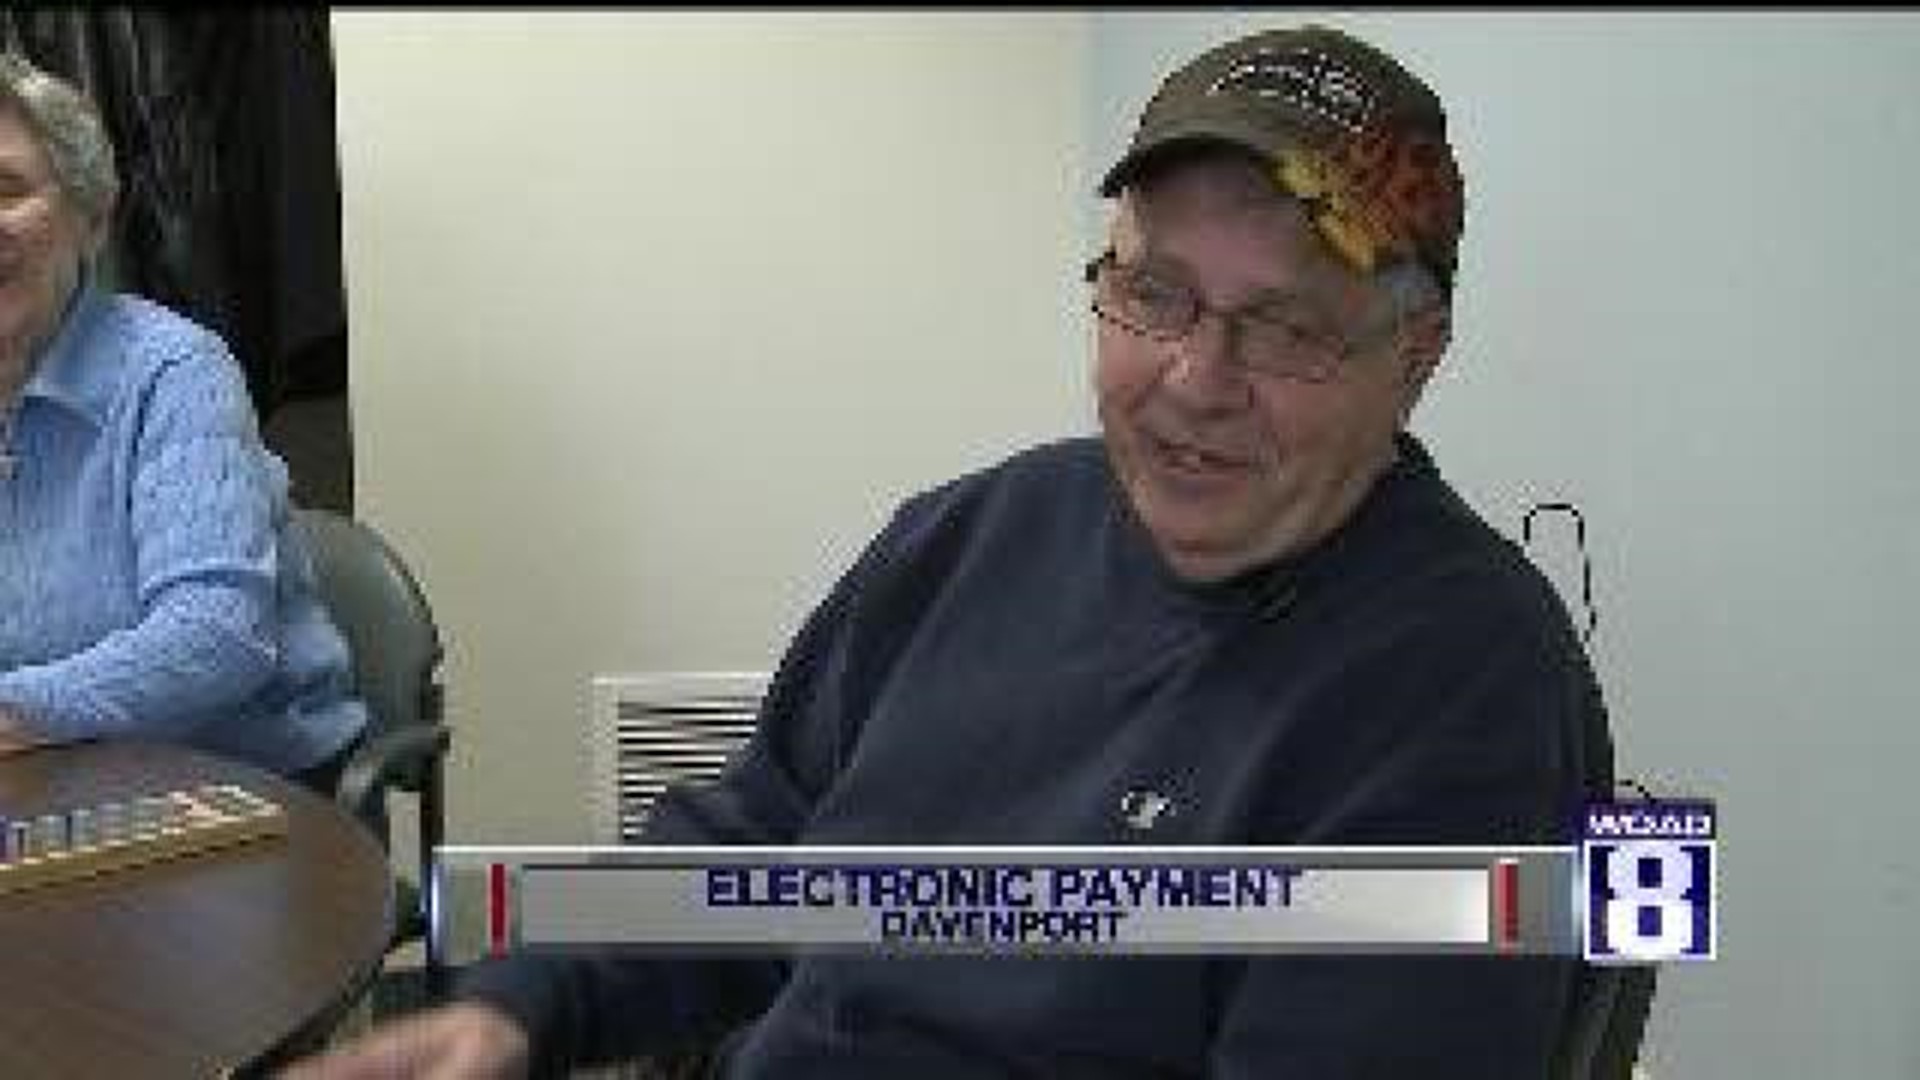 Electronic Payment Deadline